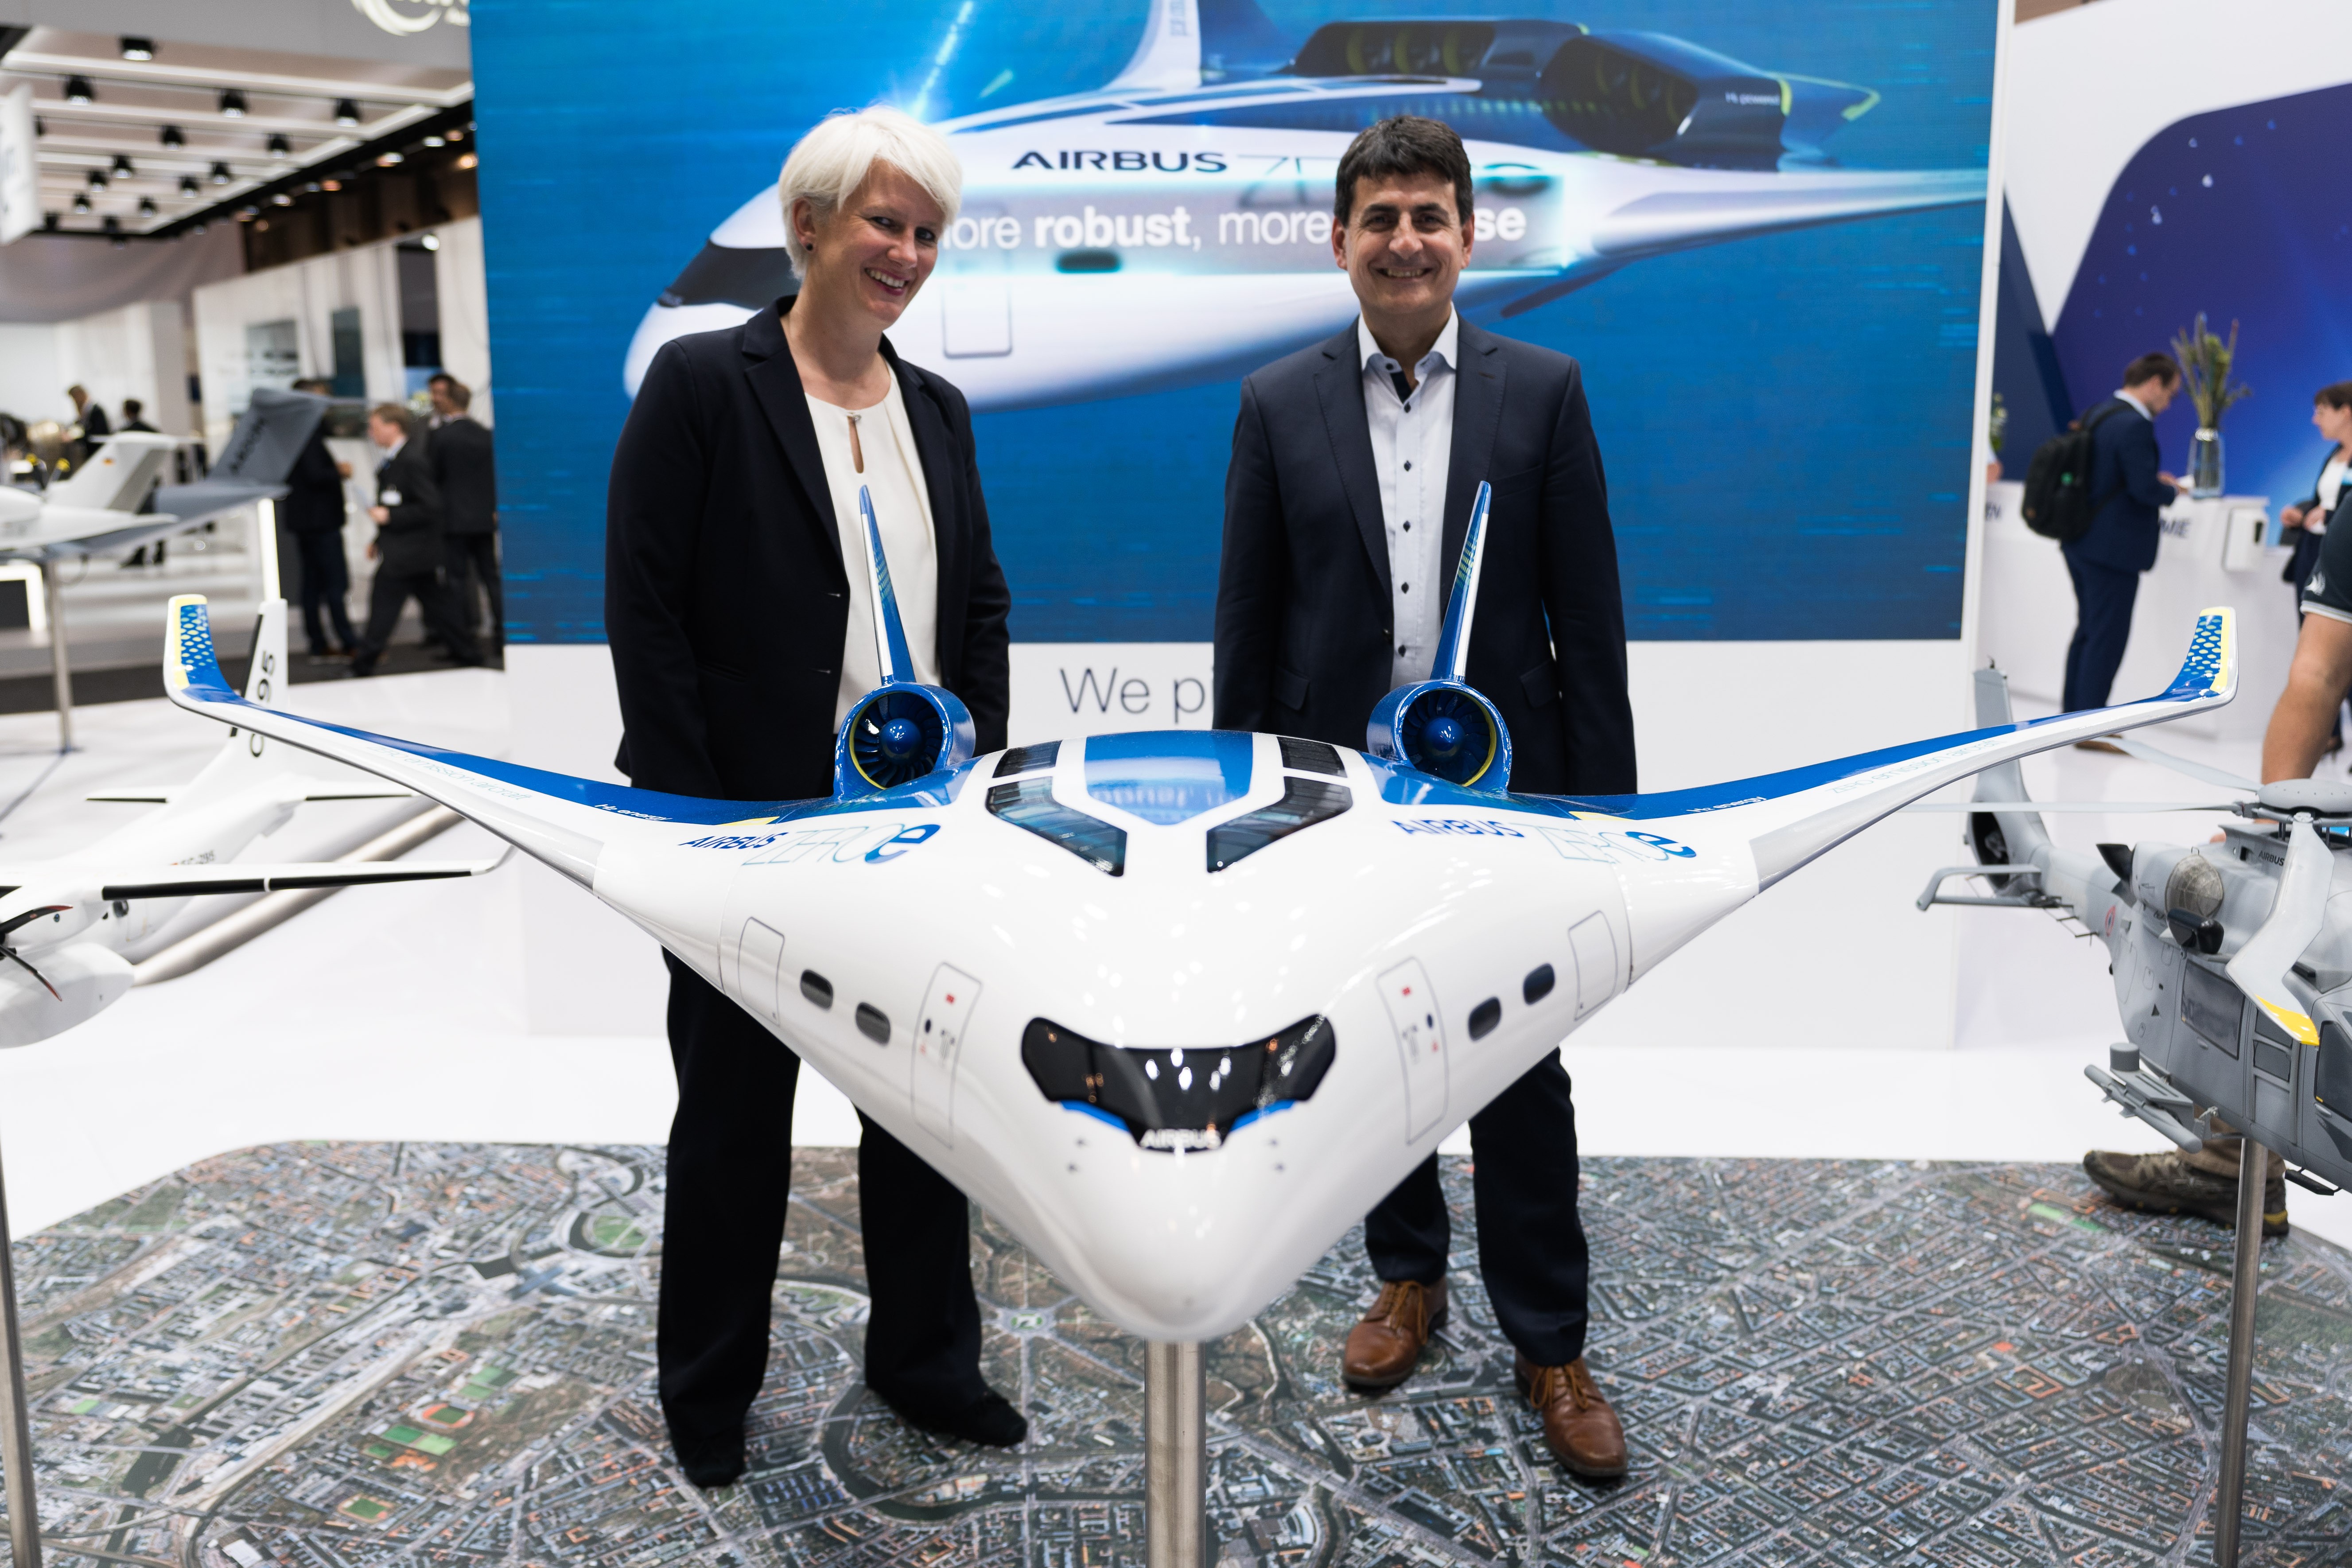 Photo Caption: Sabine Klauke, Chief Technical Officer, Airbus and Philippe Peccard, Vice President Clean Energy, Linde, sign cooperation agreement at the ILA Airshow in Berlin.